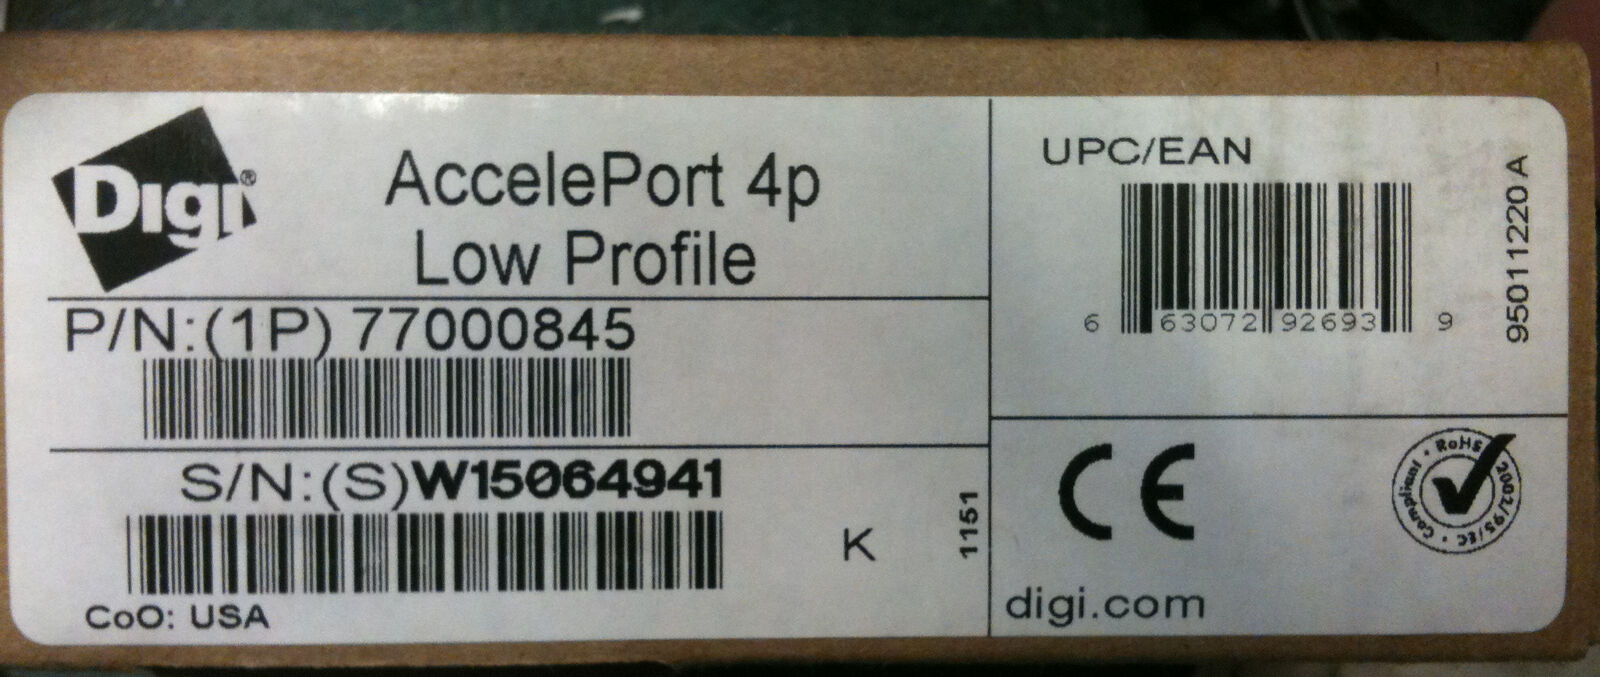 New Digi 50000839-03 AccelePort 4p Low Profile New Retail Box (13 Available)